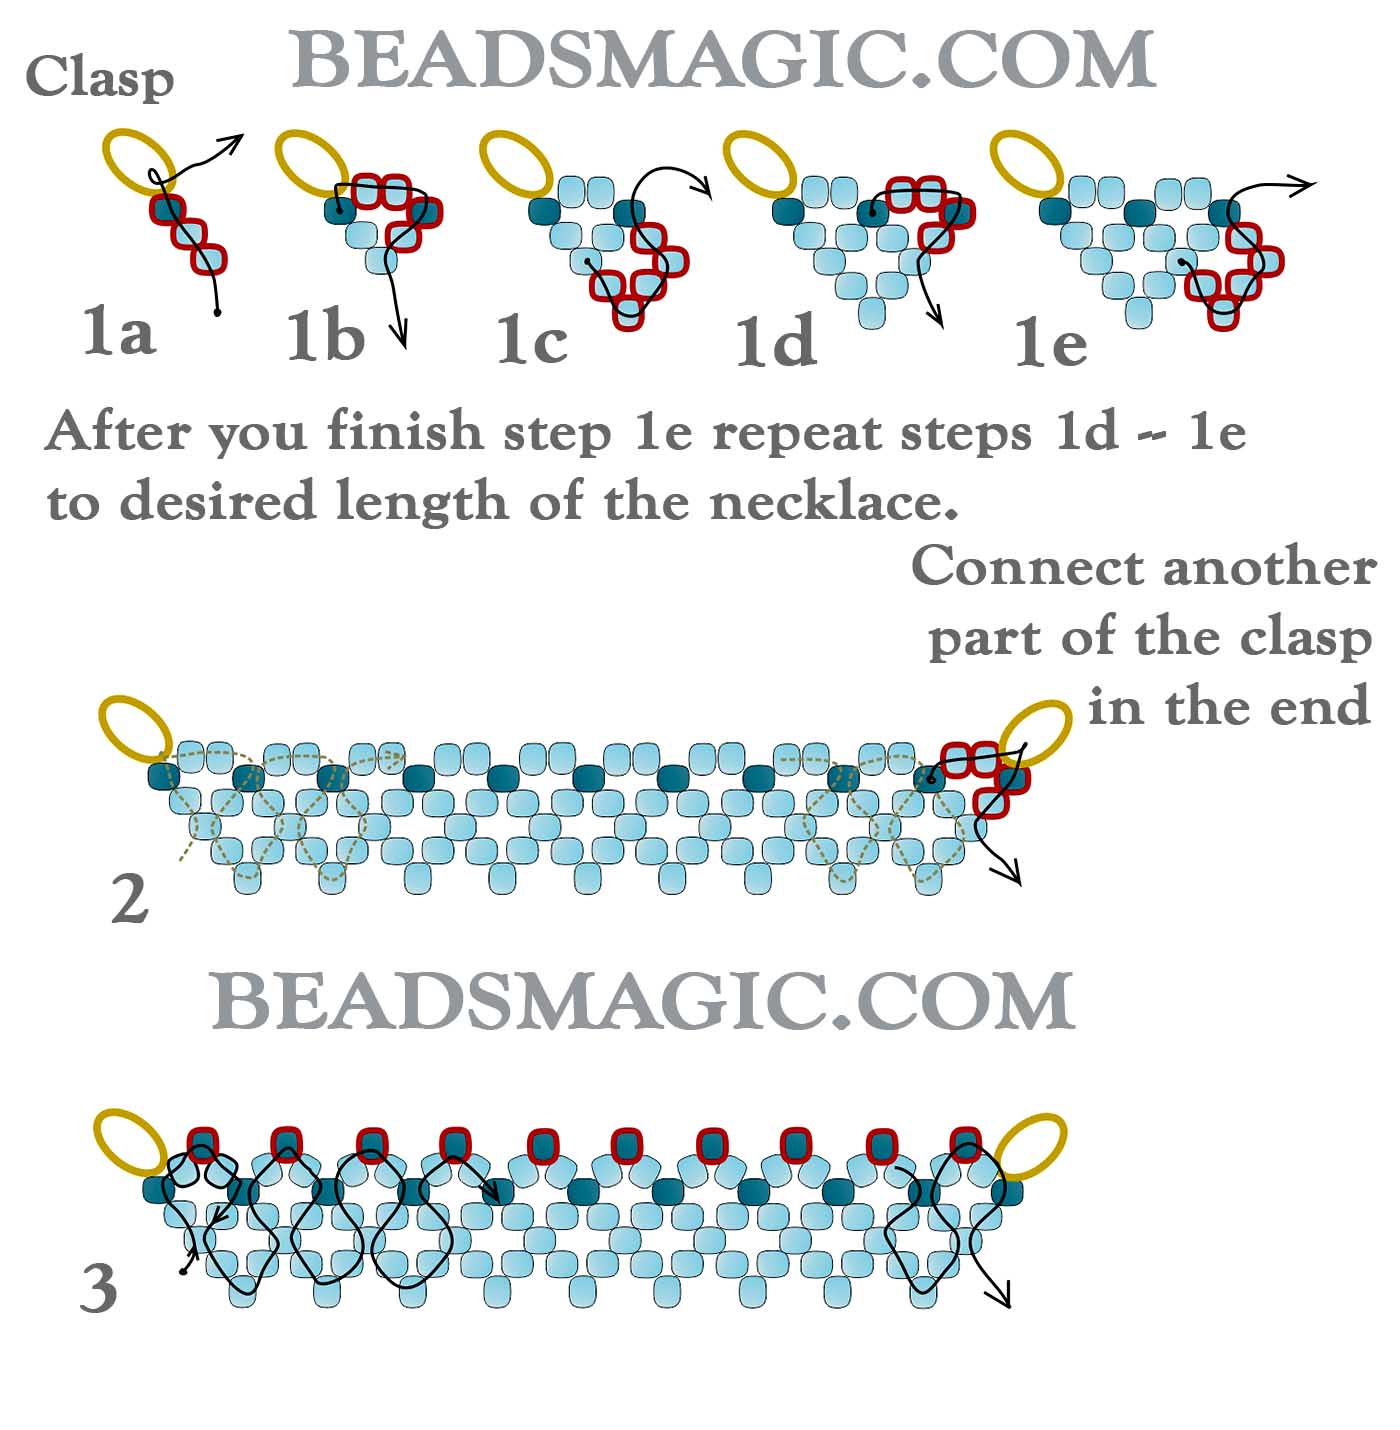 Free beading pattern for necklace, finished necklace, seed beads preciosa, preciosa maximum pearls, winter impression, festive necklace, toho, miyuki, pressed round beads, beaded necklace, bead netting, bead beginner, step-by-step beading instructions, seed beads necklace